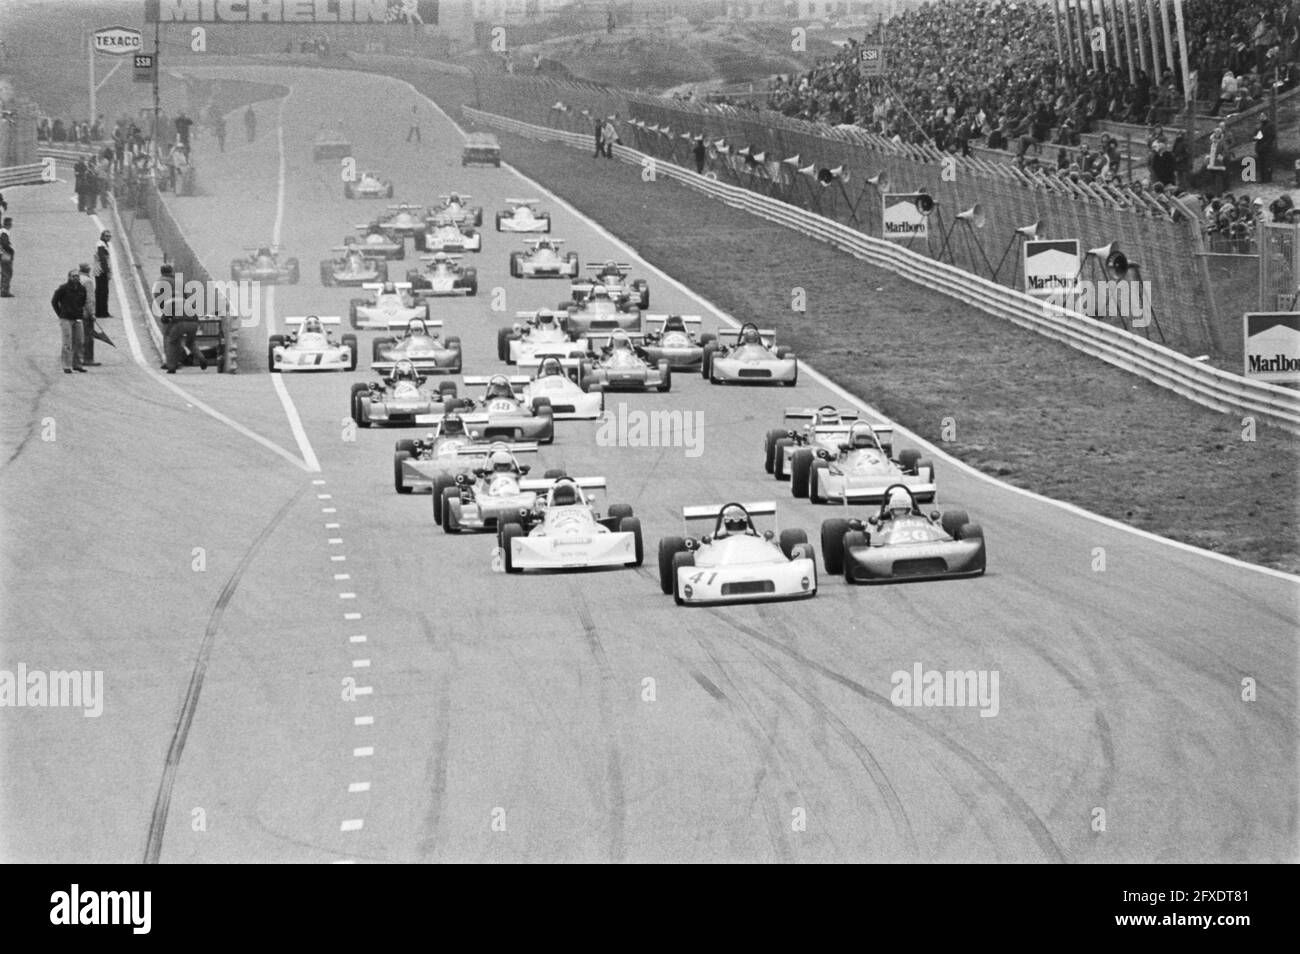 Start of Formula 3 race, April 11, 1977, motor sports, race cars, races, The Netherlands, 20th century press agency photo, news to remember, documentary, historic photography 1945-1990, visual stories, human history of the Twentieth Century, capturing moments in time Stock Photo